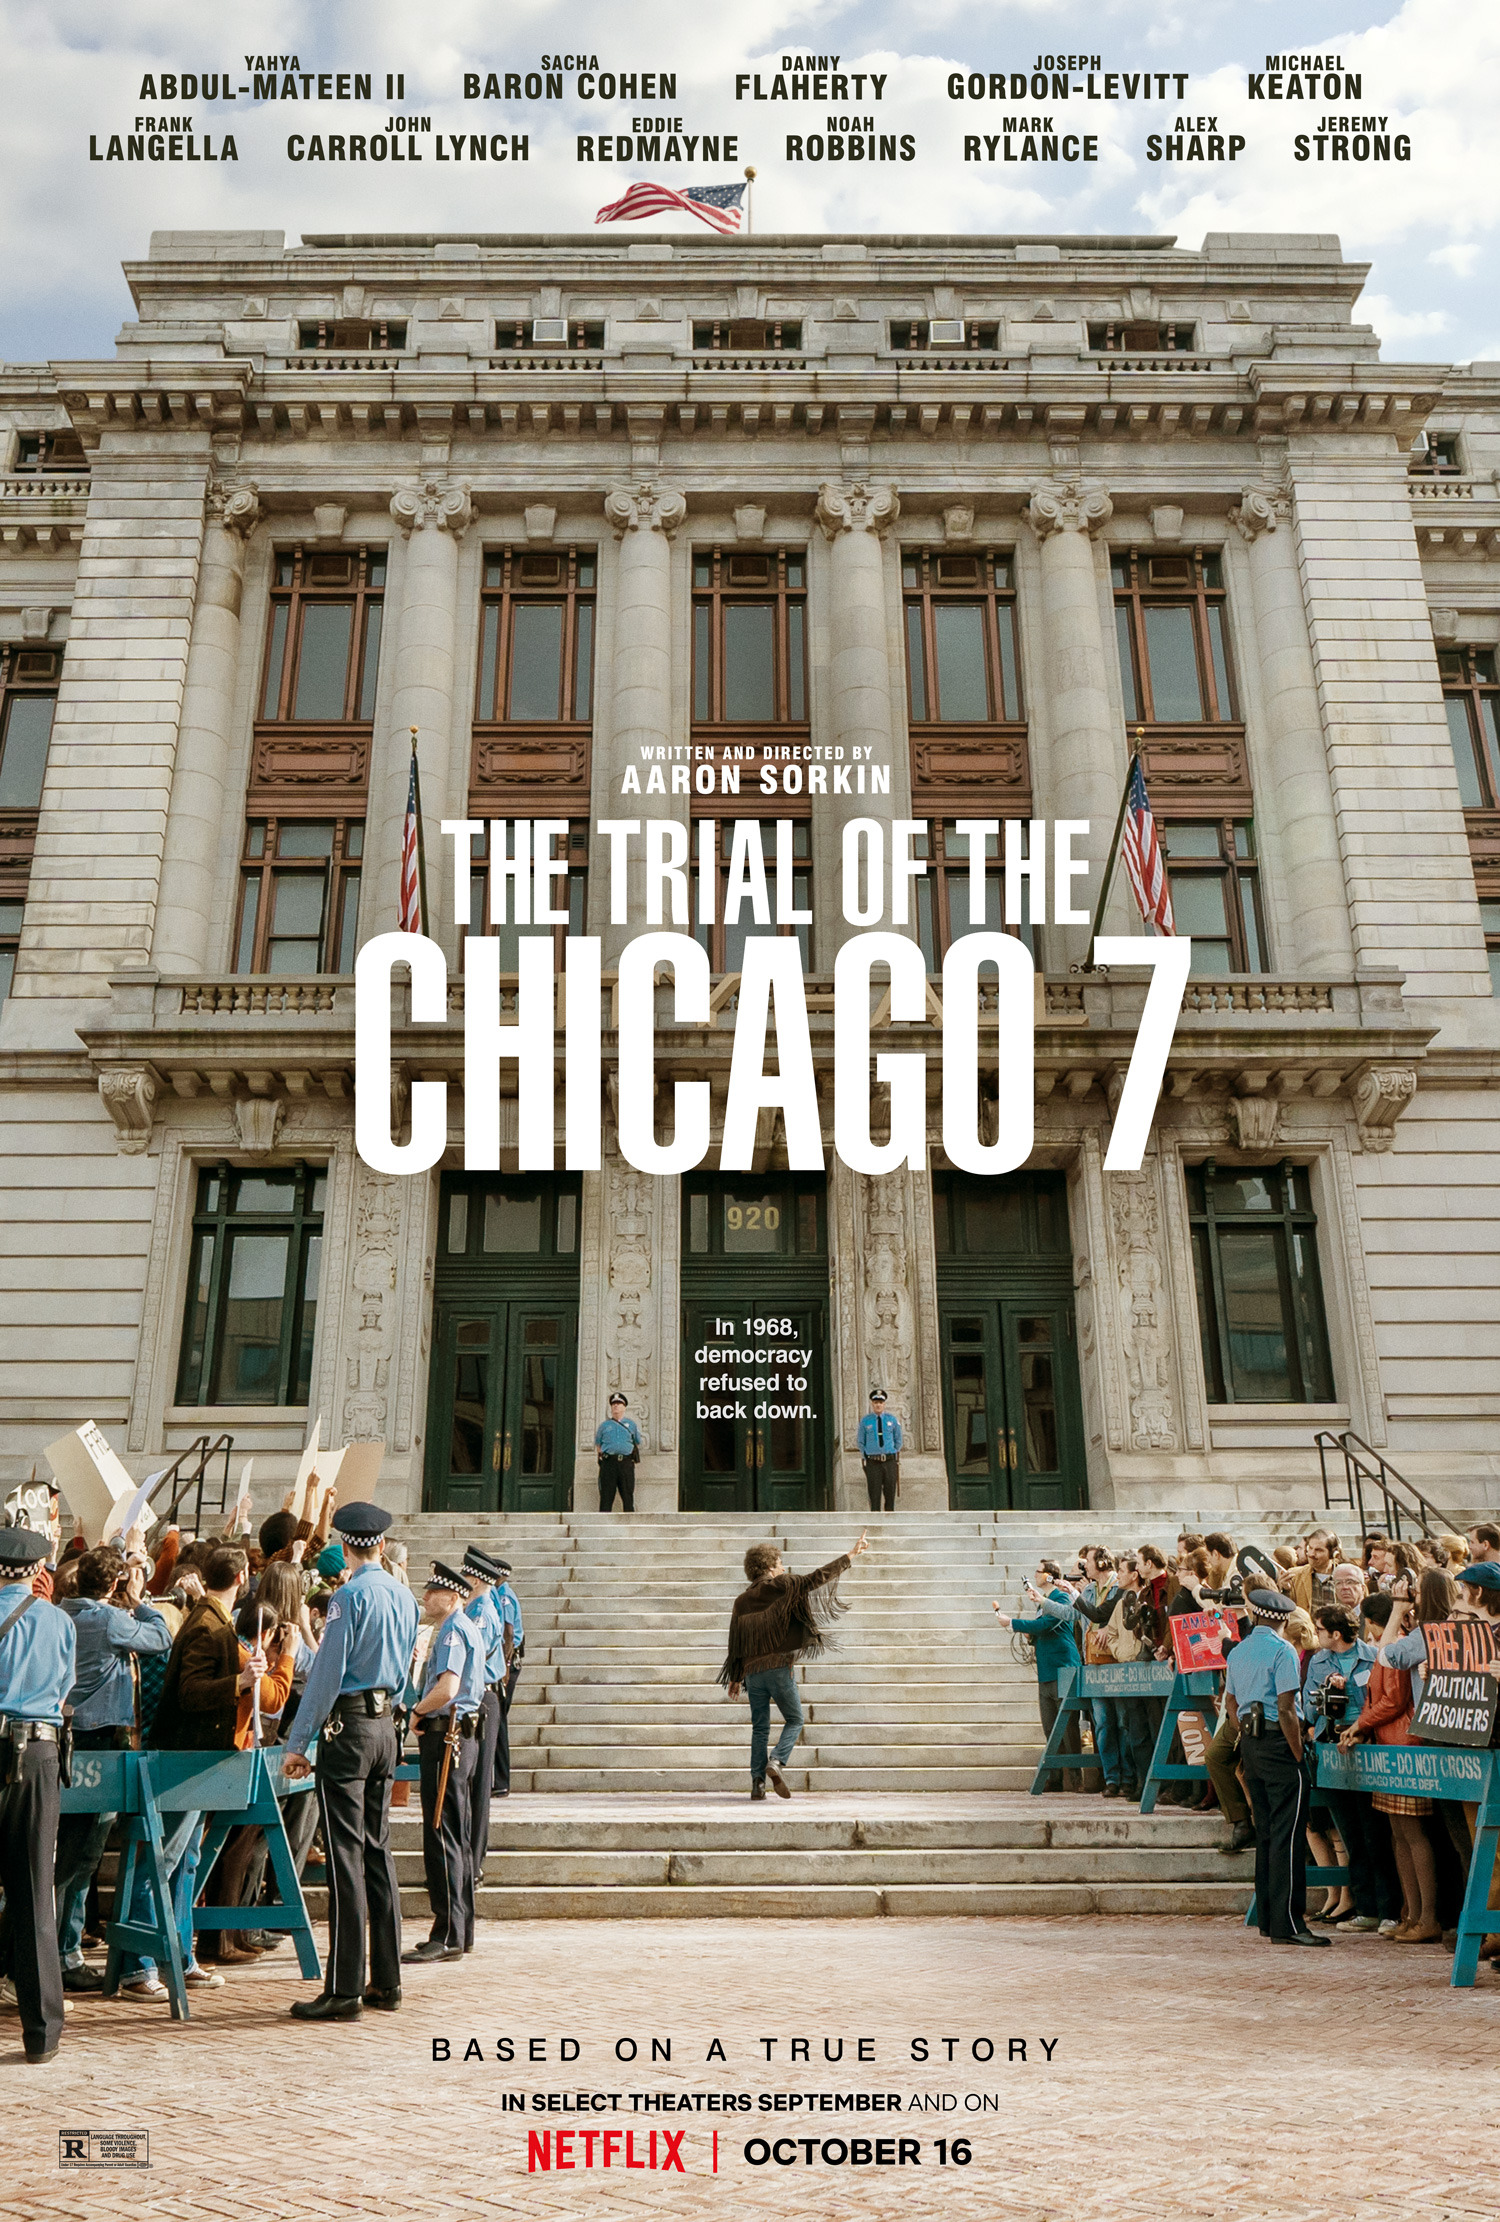 Mega Sized Movie Poster Image for The Trial of the Chicago 7 